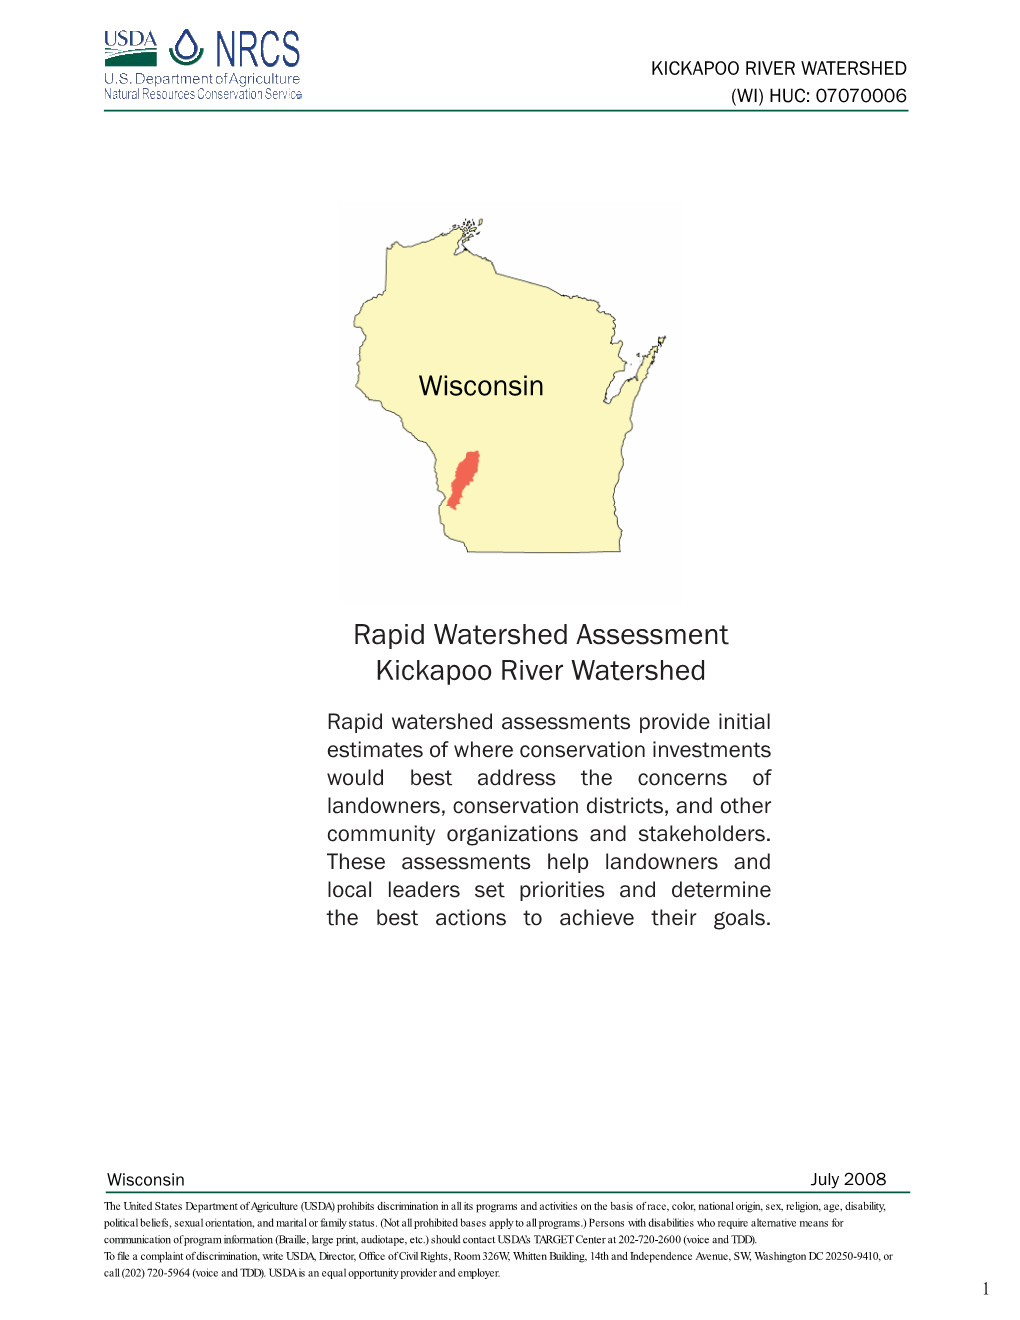 Rapid Watershed Assessment Kickapoo River Watershed Wisconsin